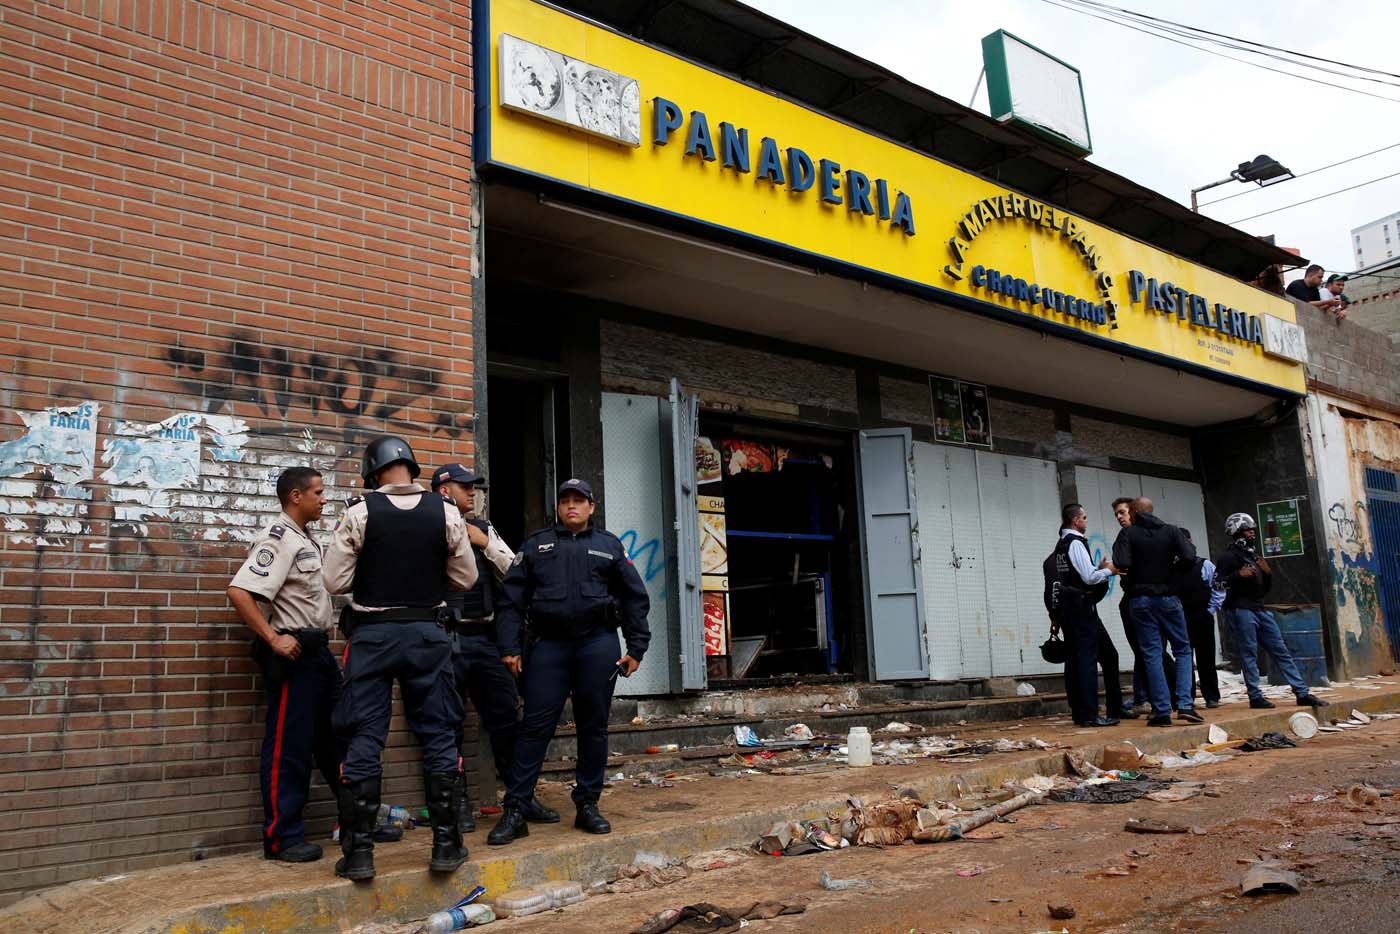 Police officers and criminal investigators stand in front of a bakery, after it was looted in Caracas, Venezuela April 21, 2017. REUTERS/Carlos Garcia Rawlins